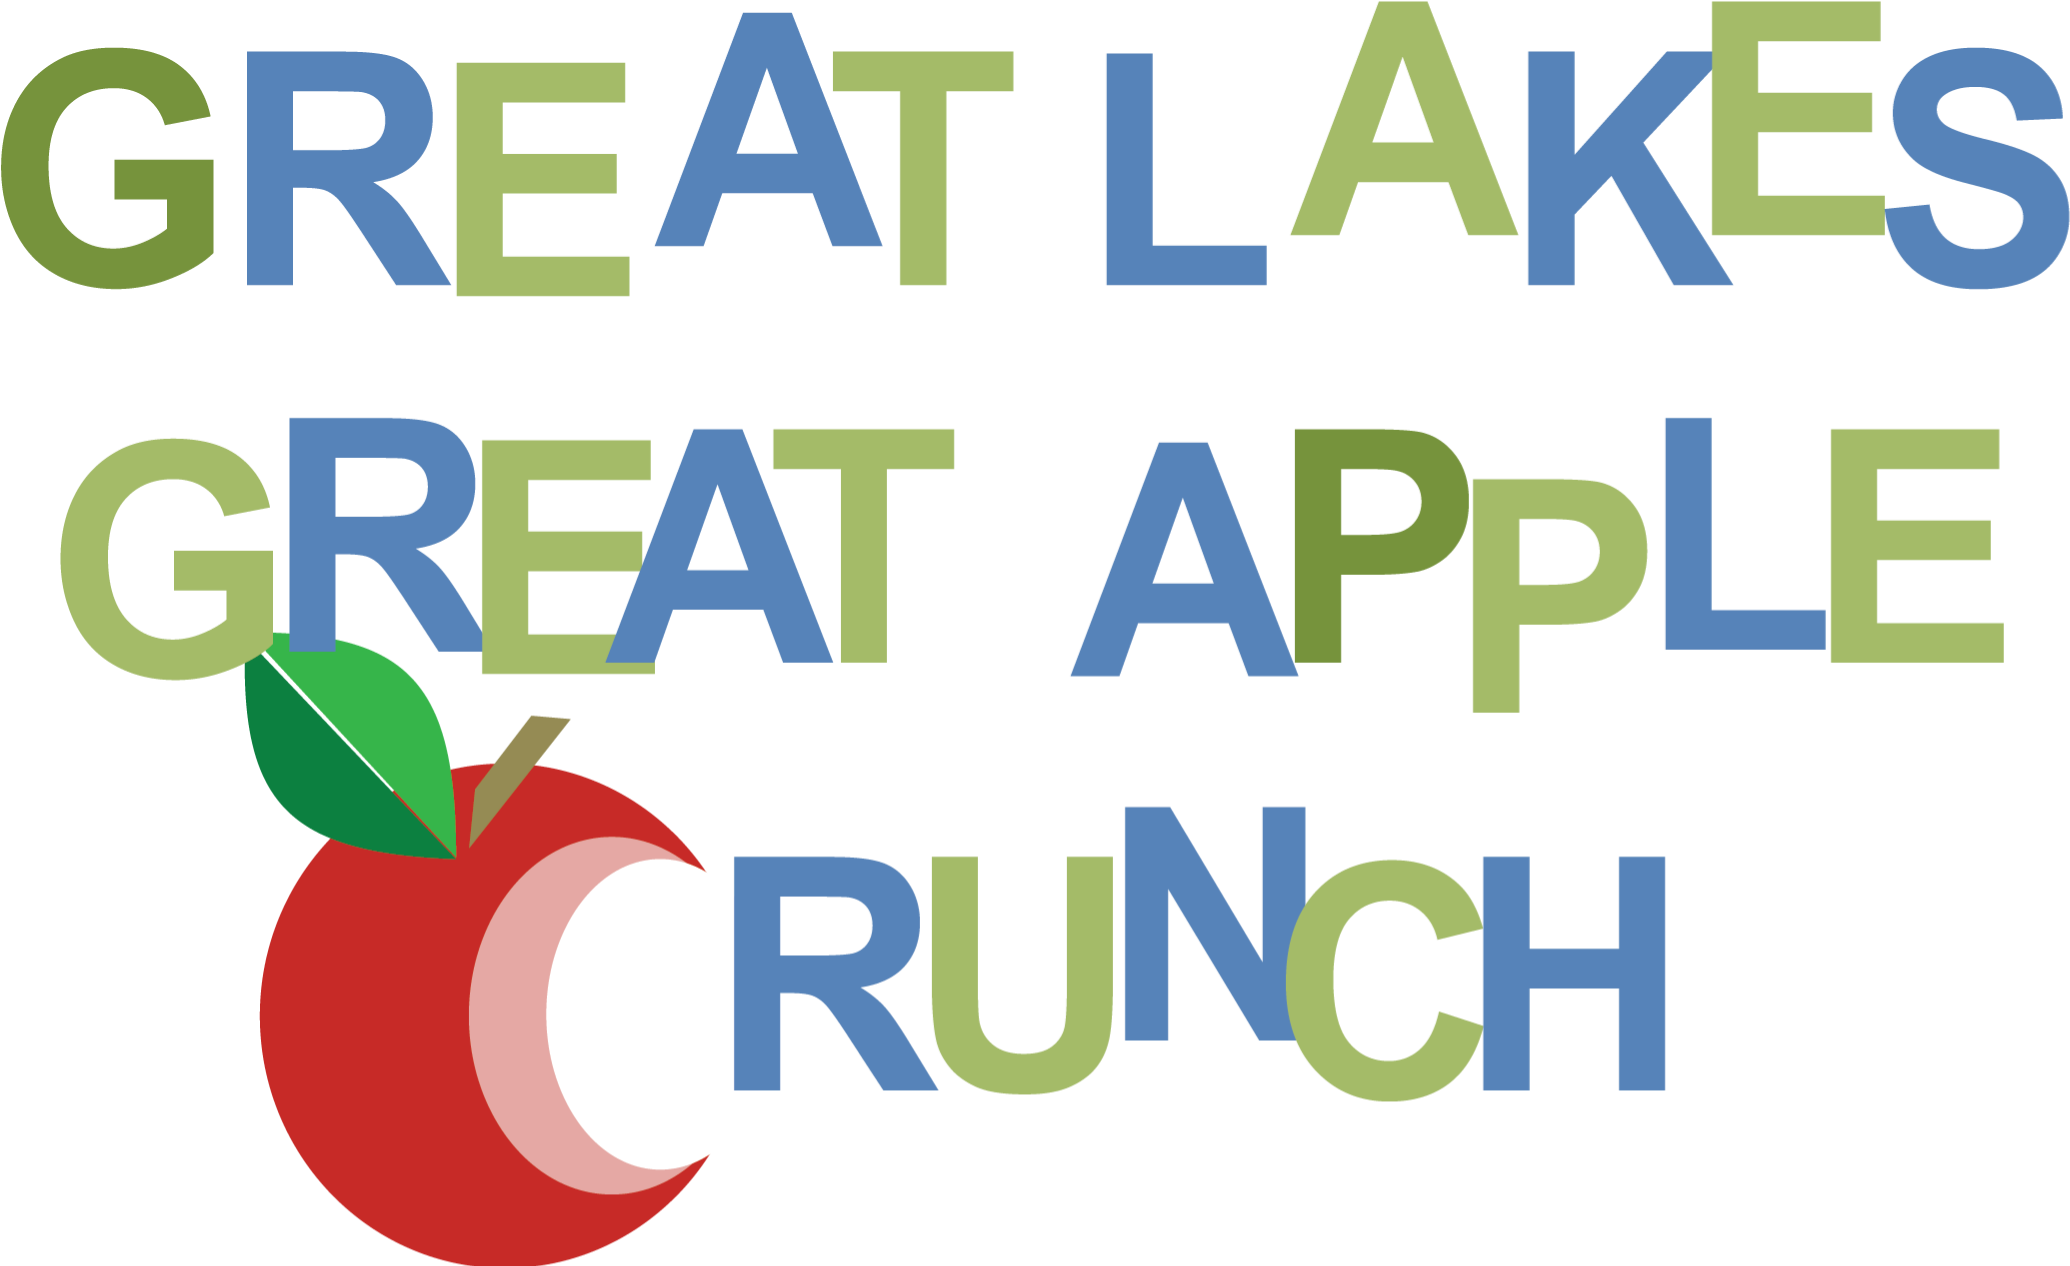 Great Lakes Apple Crunch Event Logo